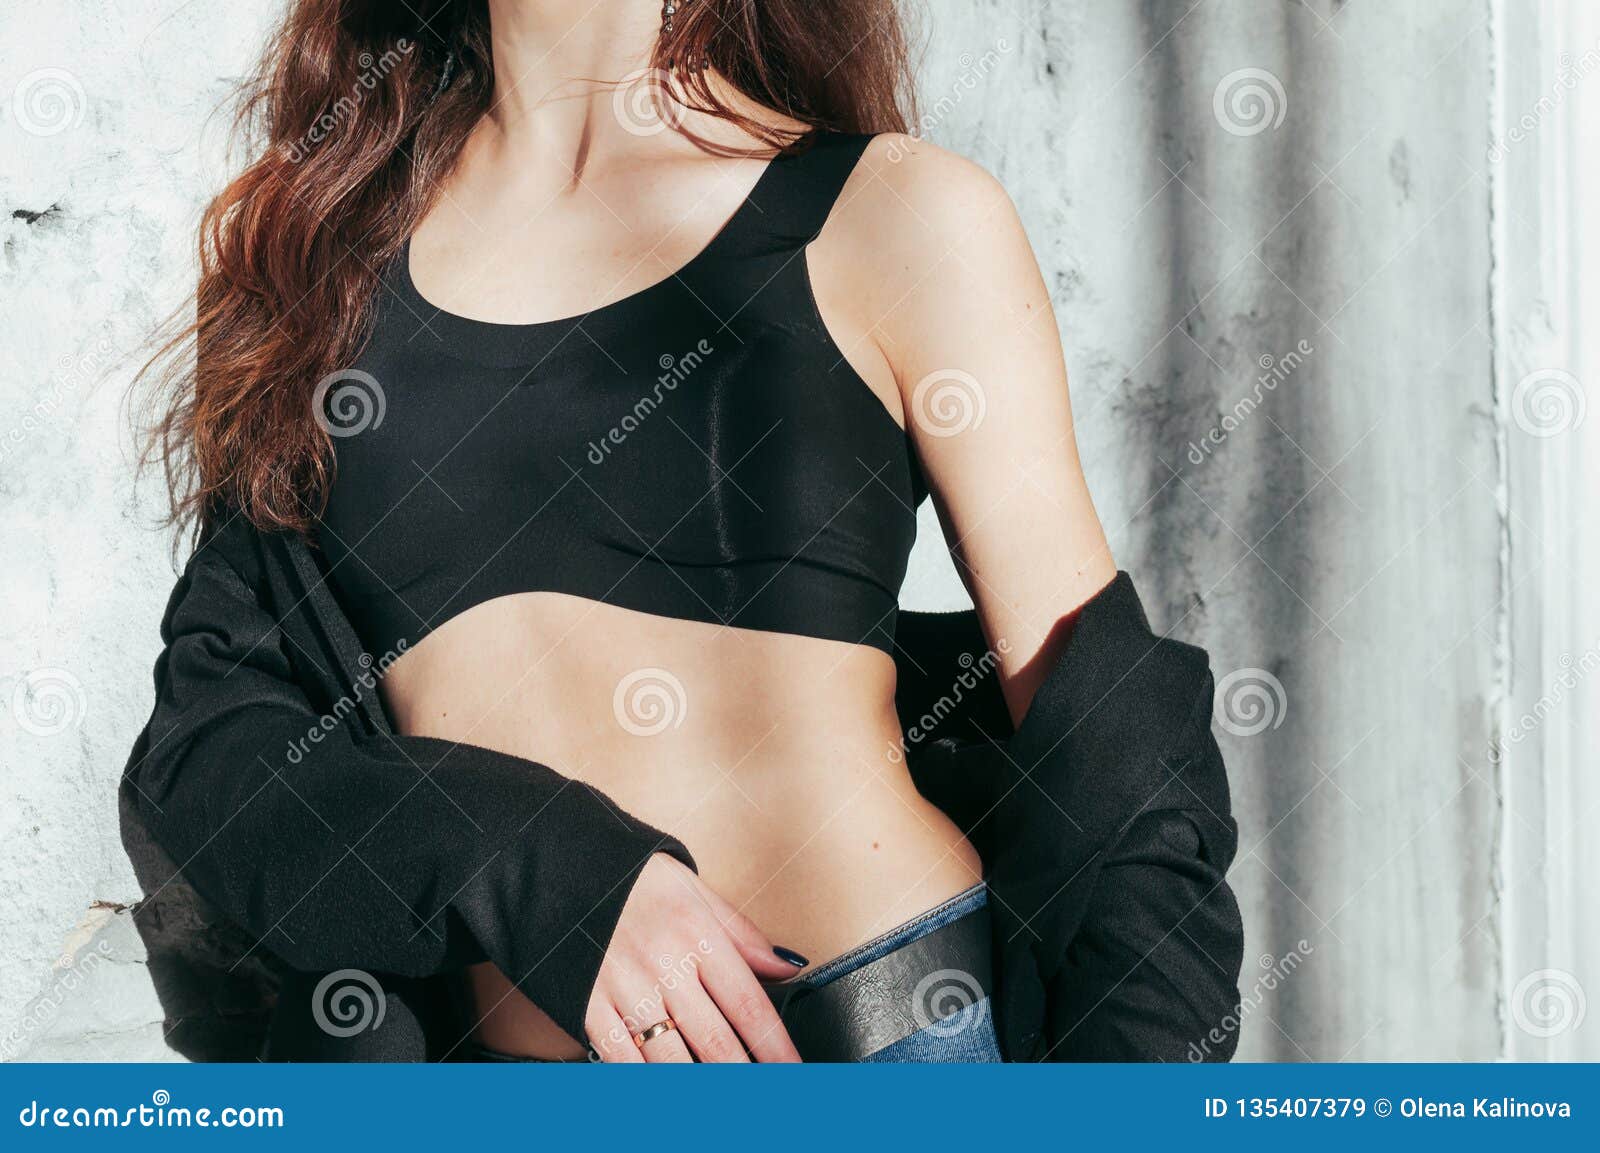 Fit Girl in a Black Jacket and Bra, Fashion Stock Image - Image of poster,  adult: 135407379